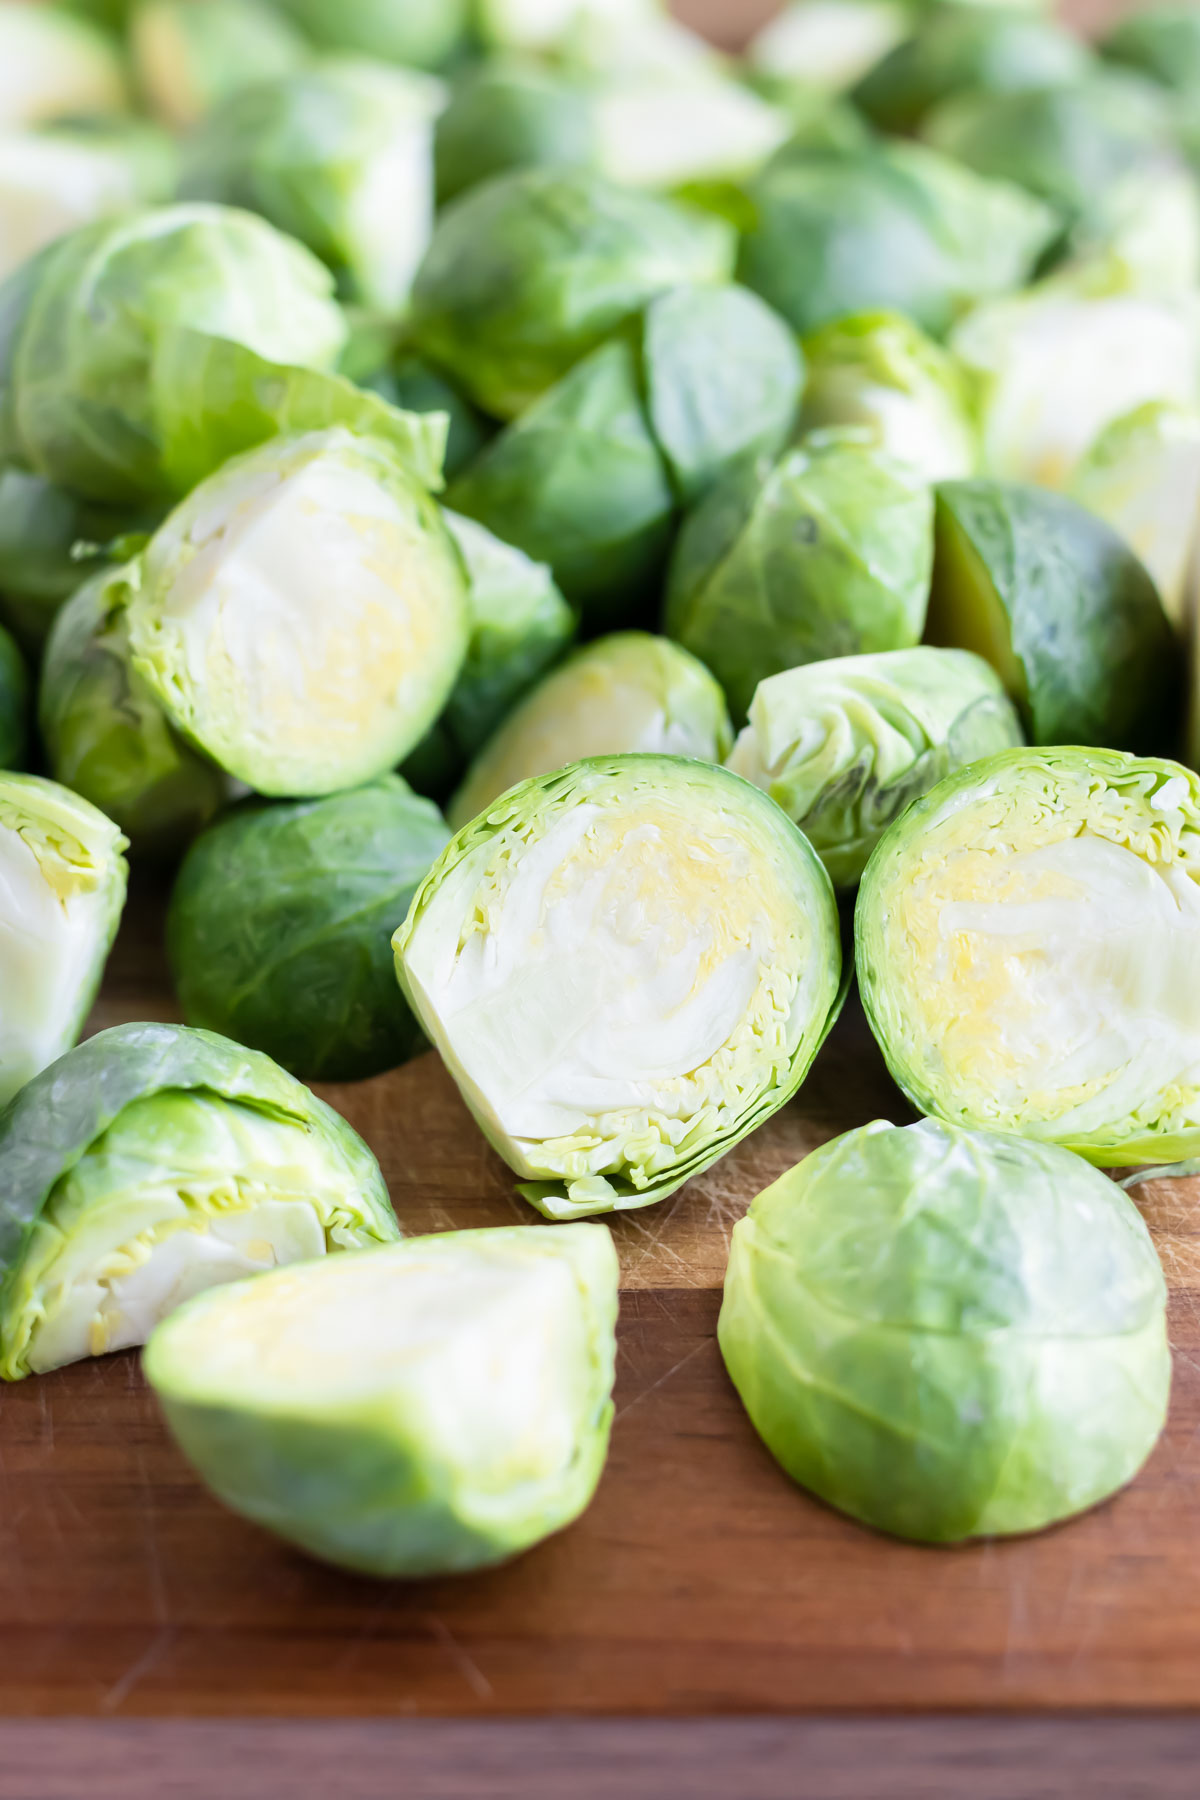 Raw Brussels sprouts are chopped and prepared for air frying.